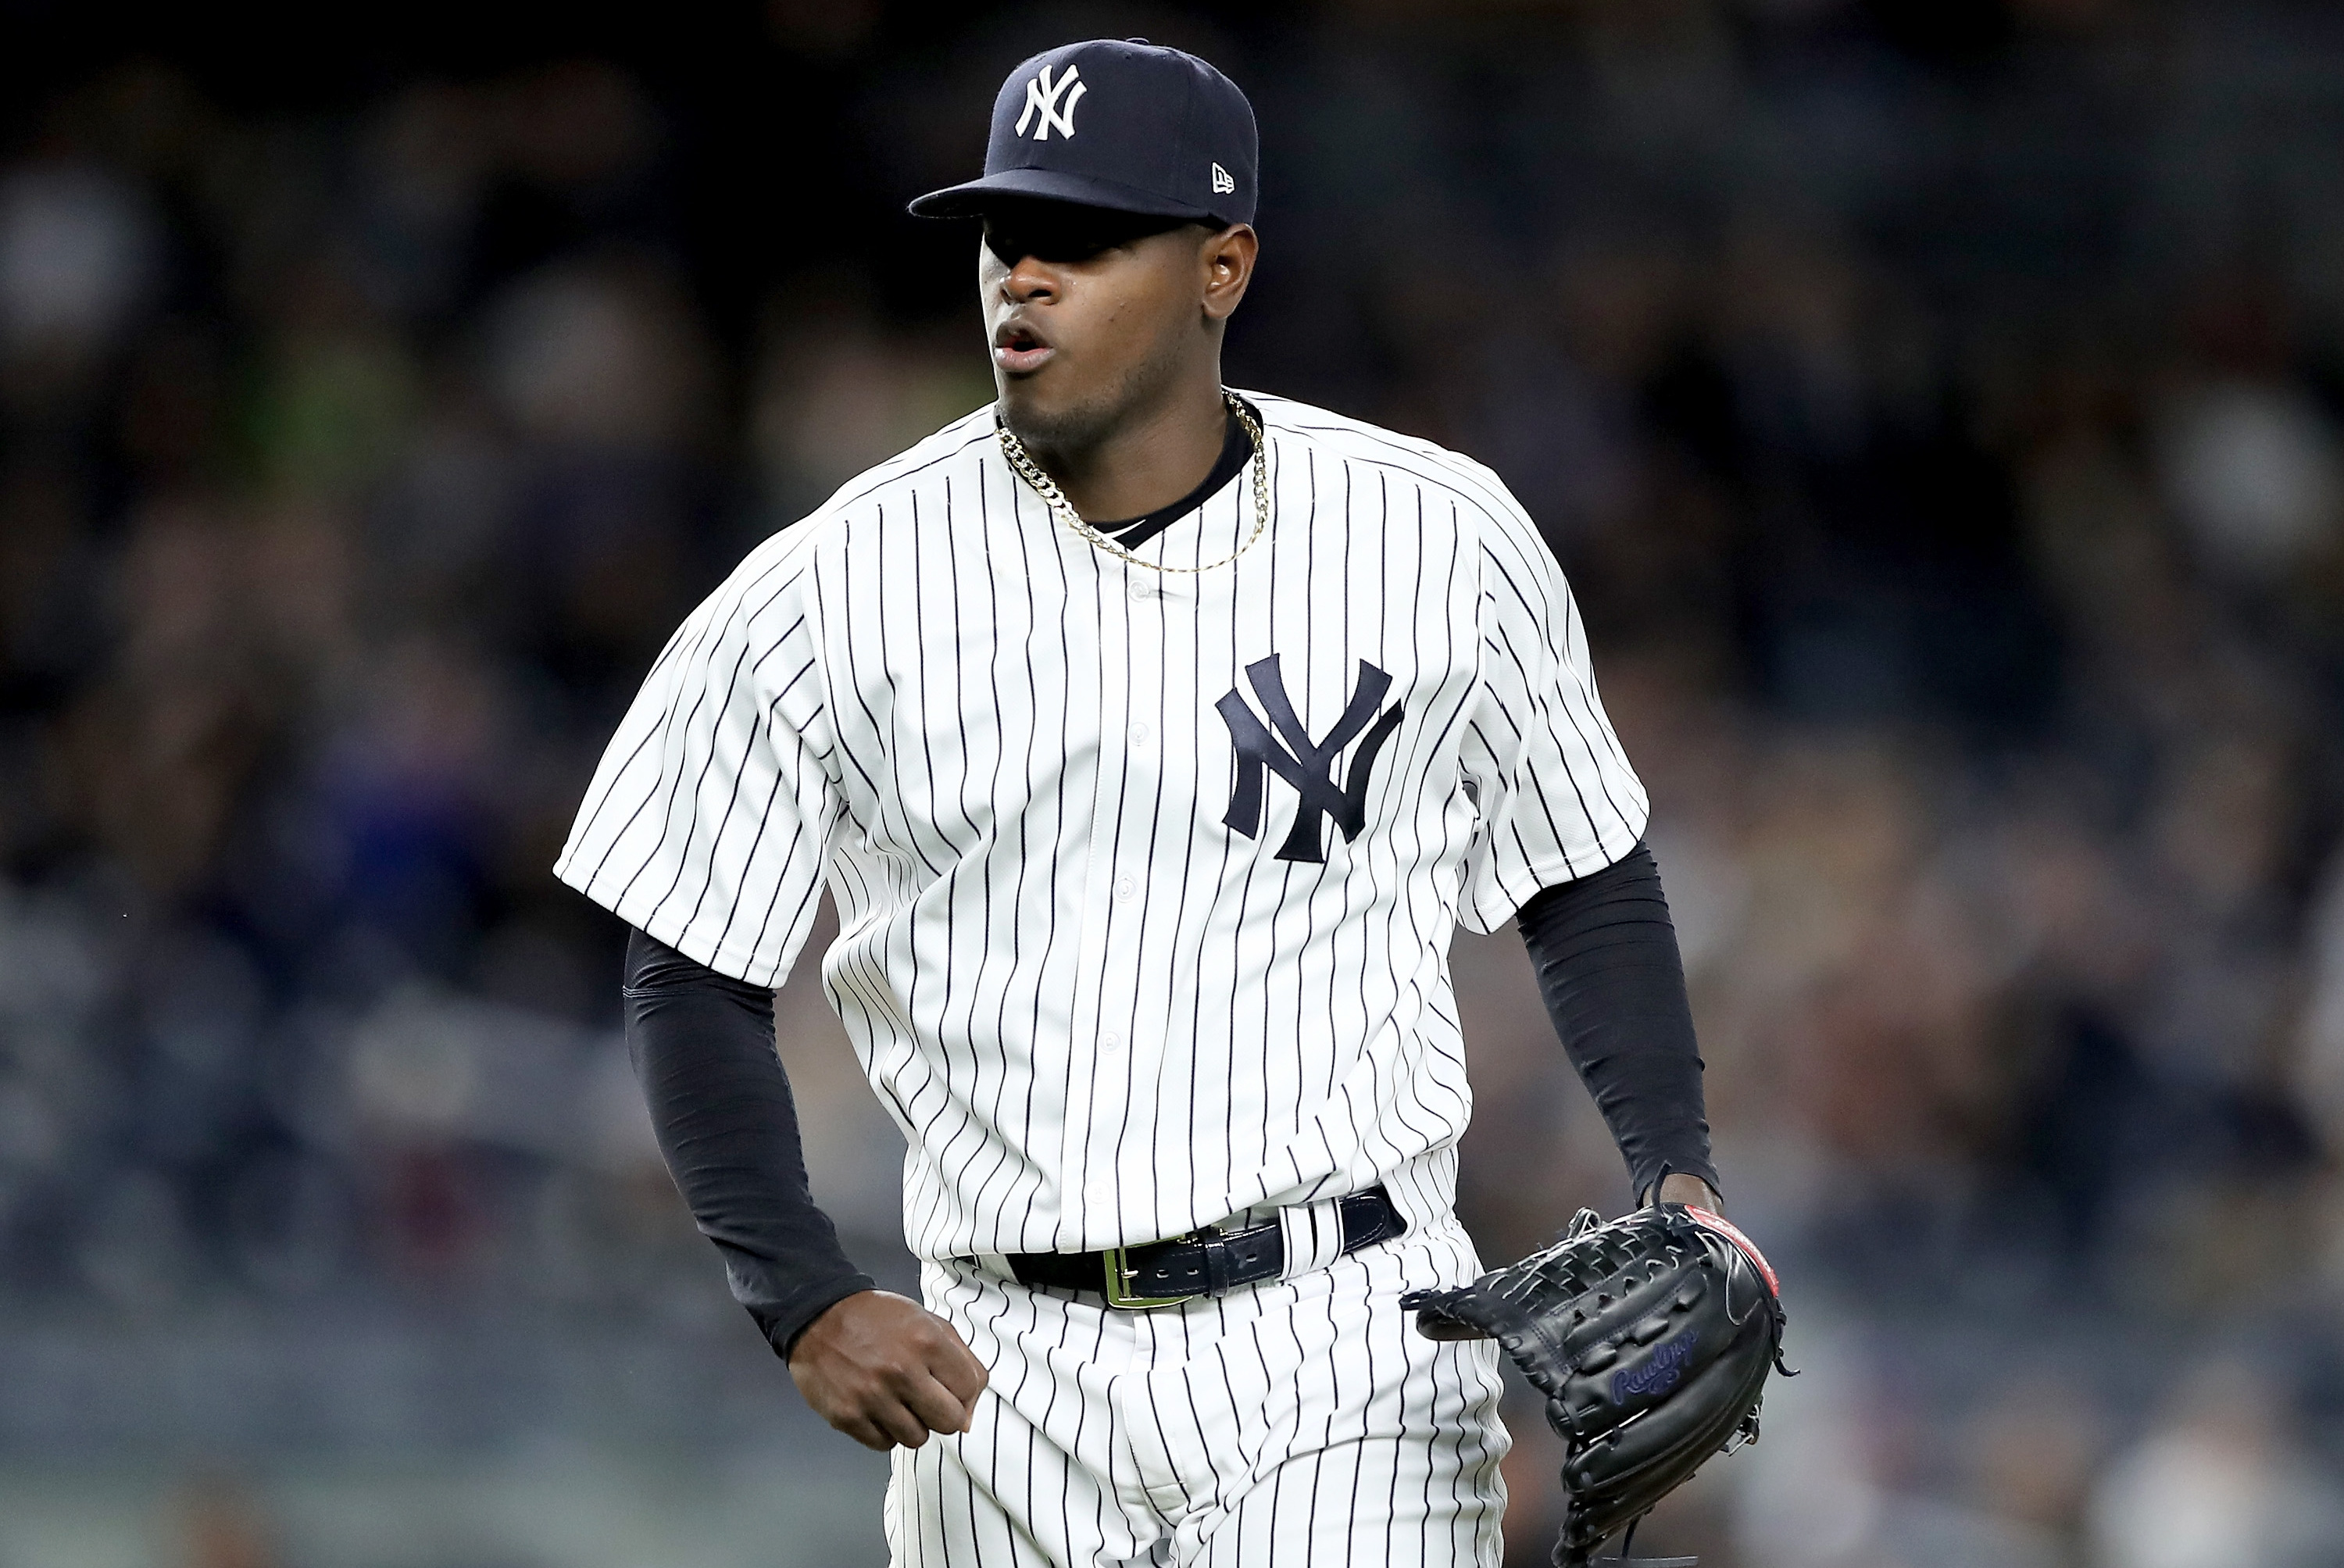 Luis Severino reminded the Yankees of his ace potential in 2022